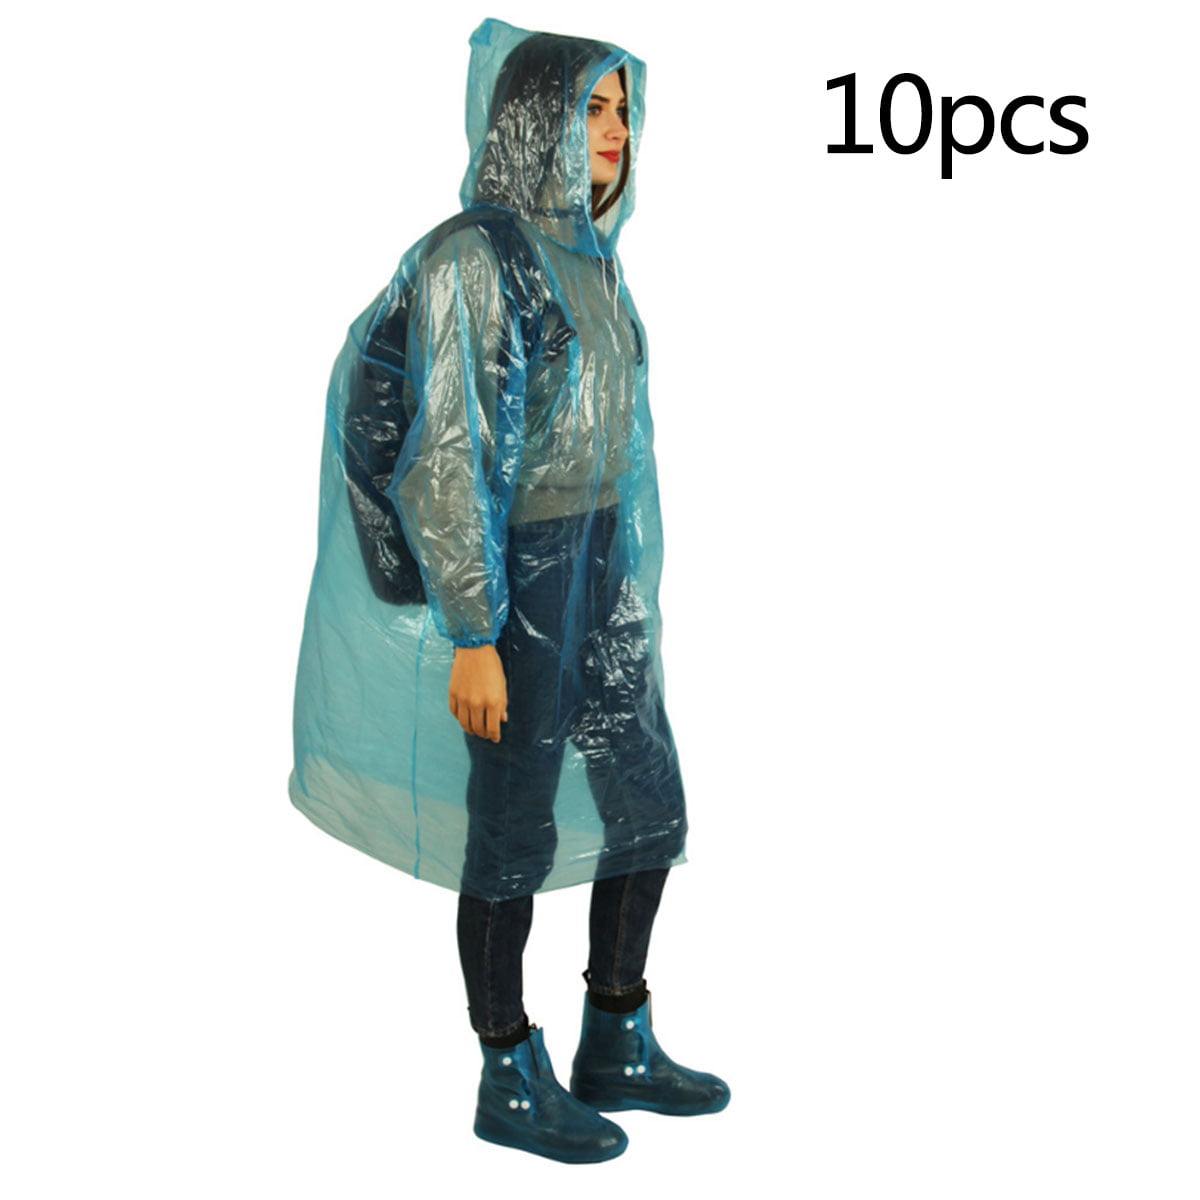 Disney 10pcs Disposable Raincoat for Kids Emergency Waterproof Rain Ponchos Durable Transparent Lightweight Raincoat with Hood for Travel School Theme Parks Camping Outdoor Festivals Concerts 